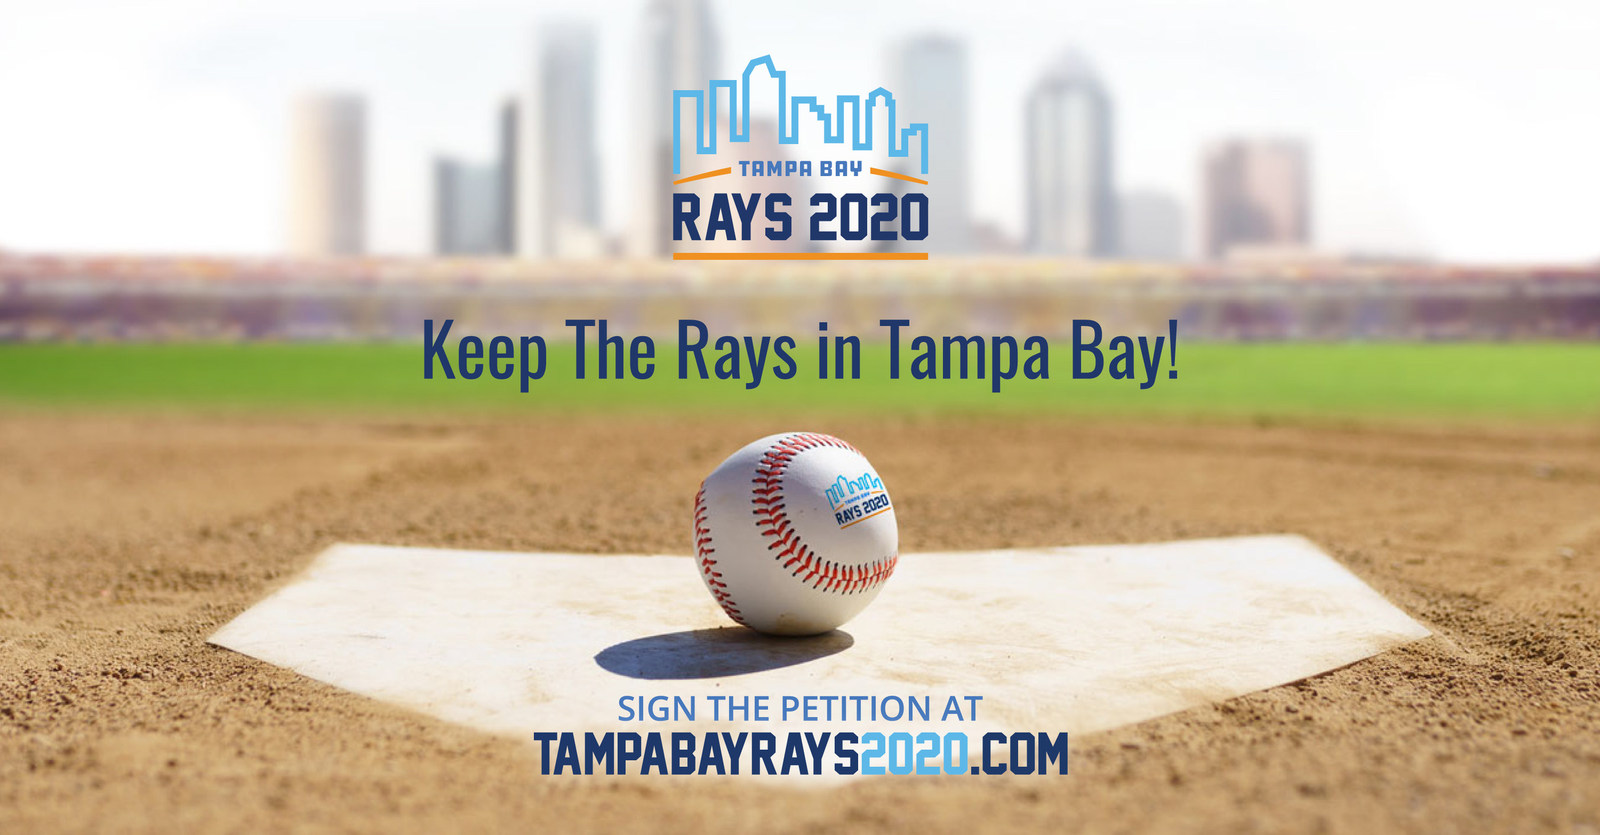 Tampa Bay Rays 2020 Movement Starts Petition To Keep Team